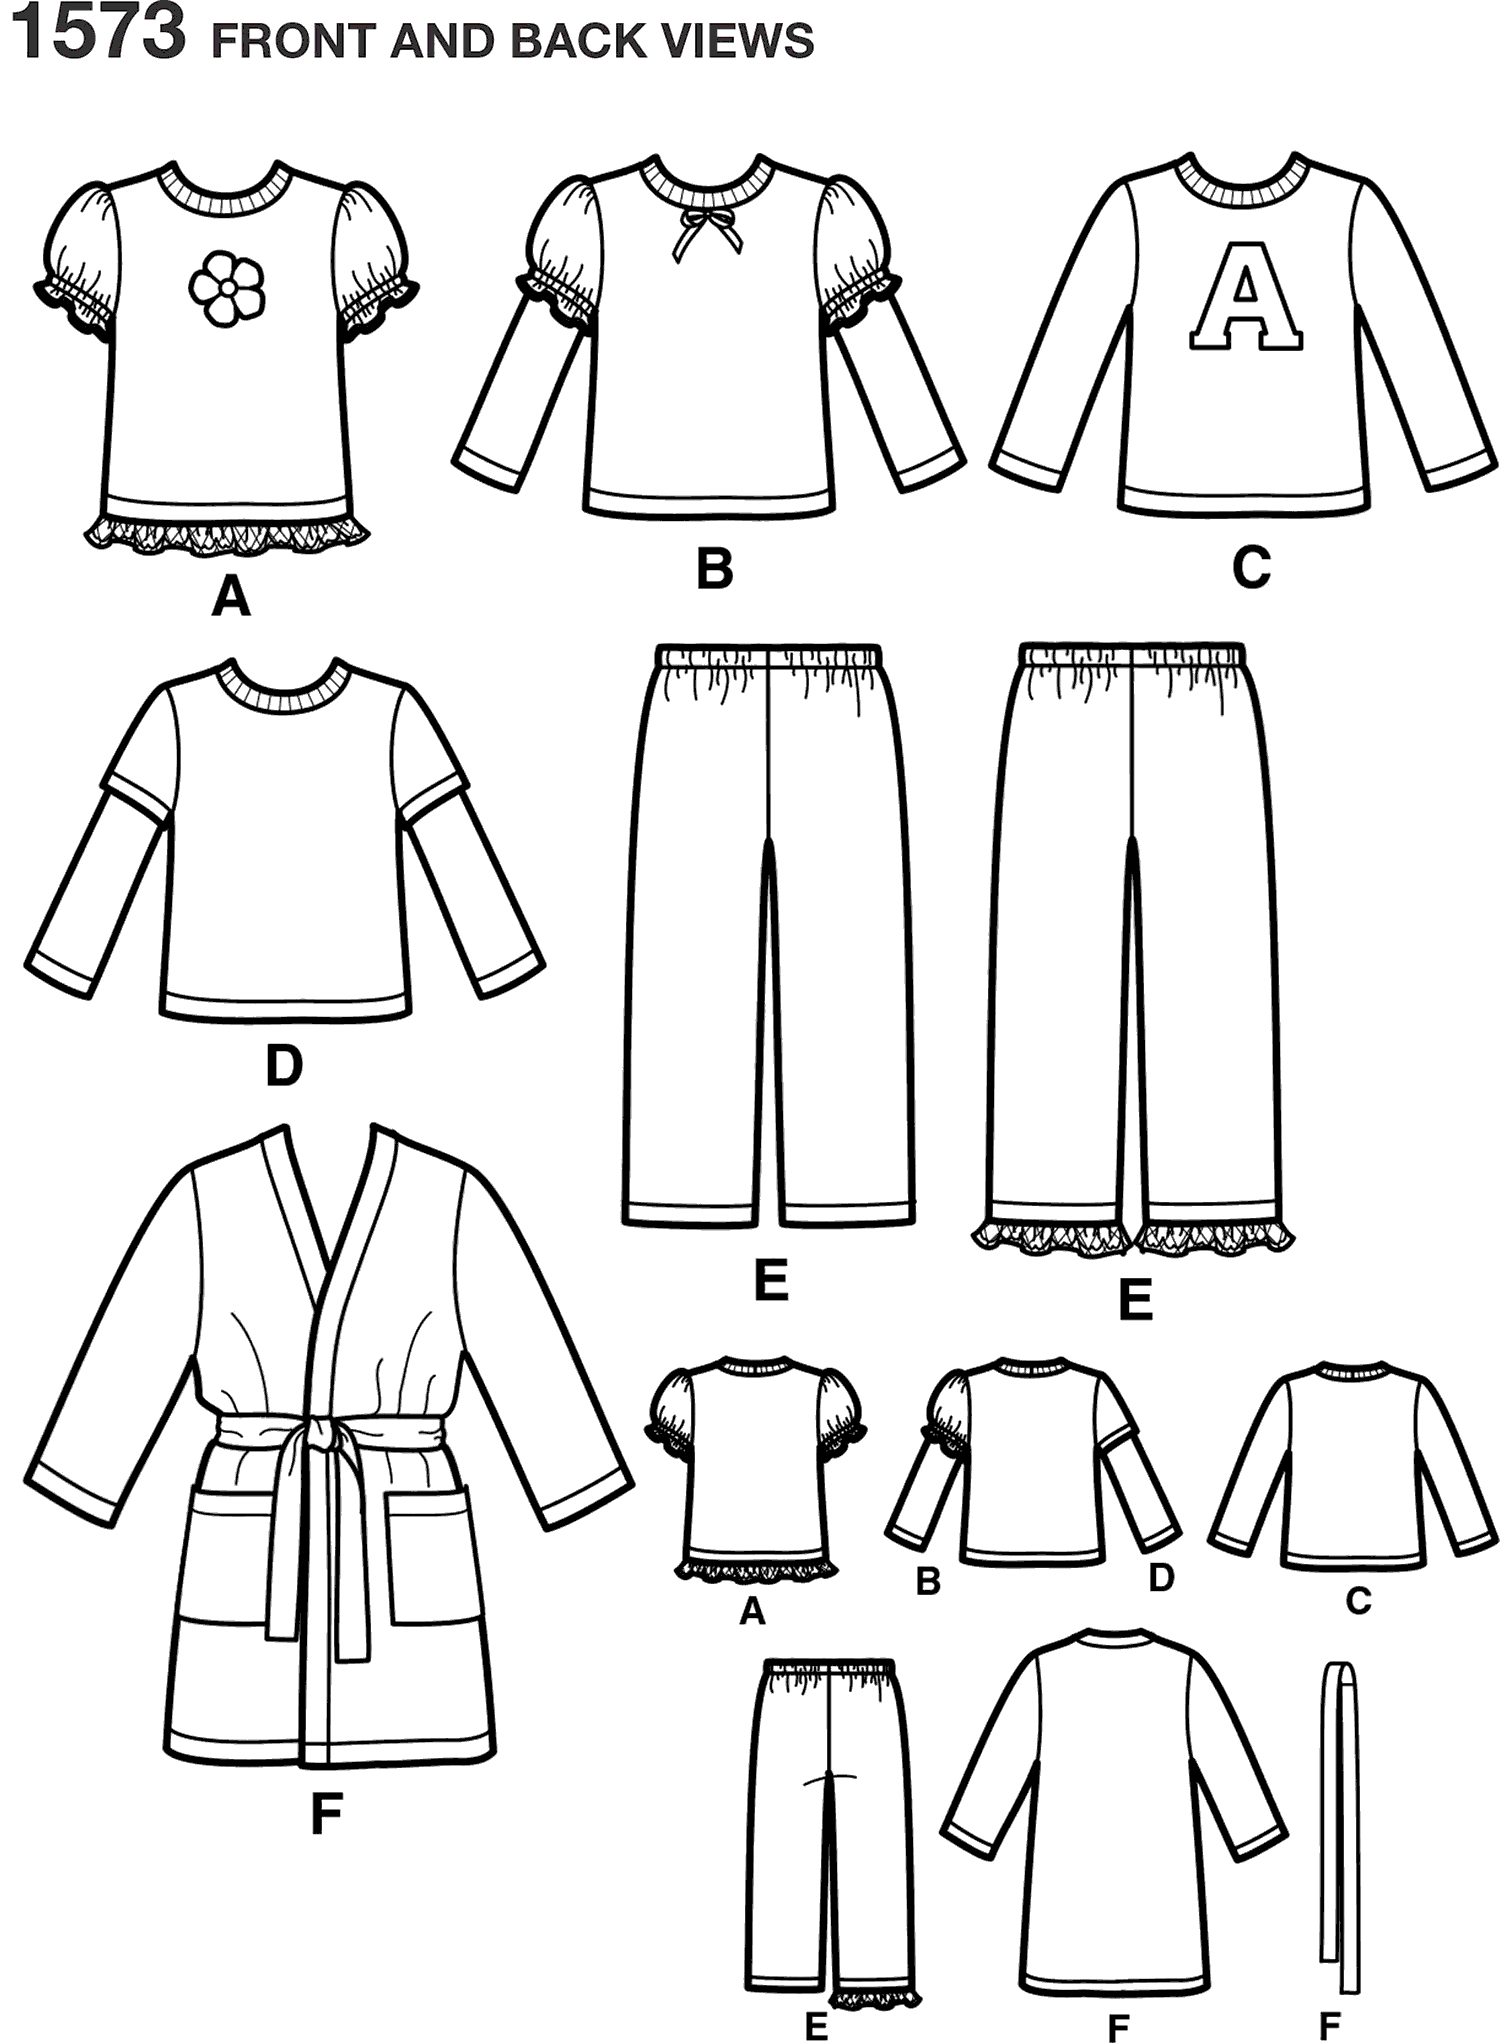 Simplicity Pattern 1573 Toddlers and Childs Loungewear Line Art From Patternsandplains.com